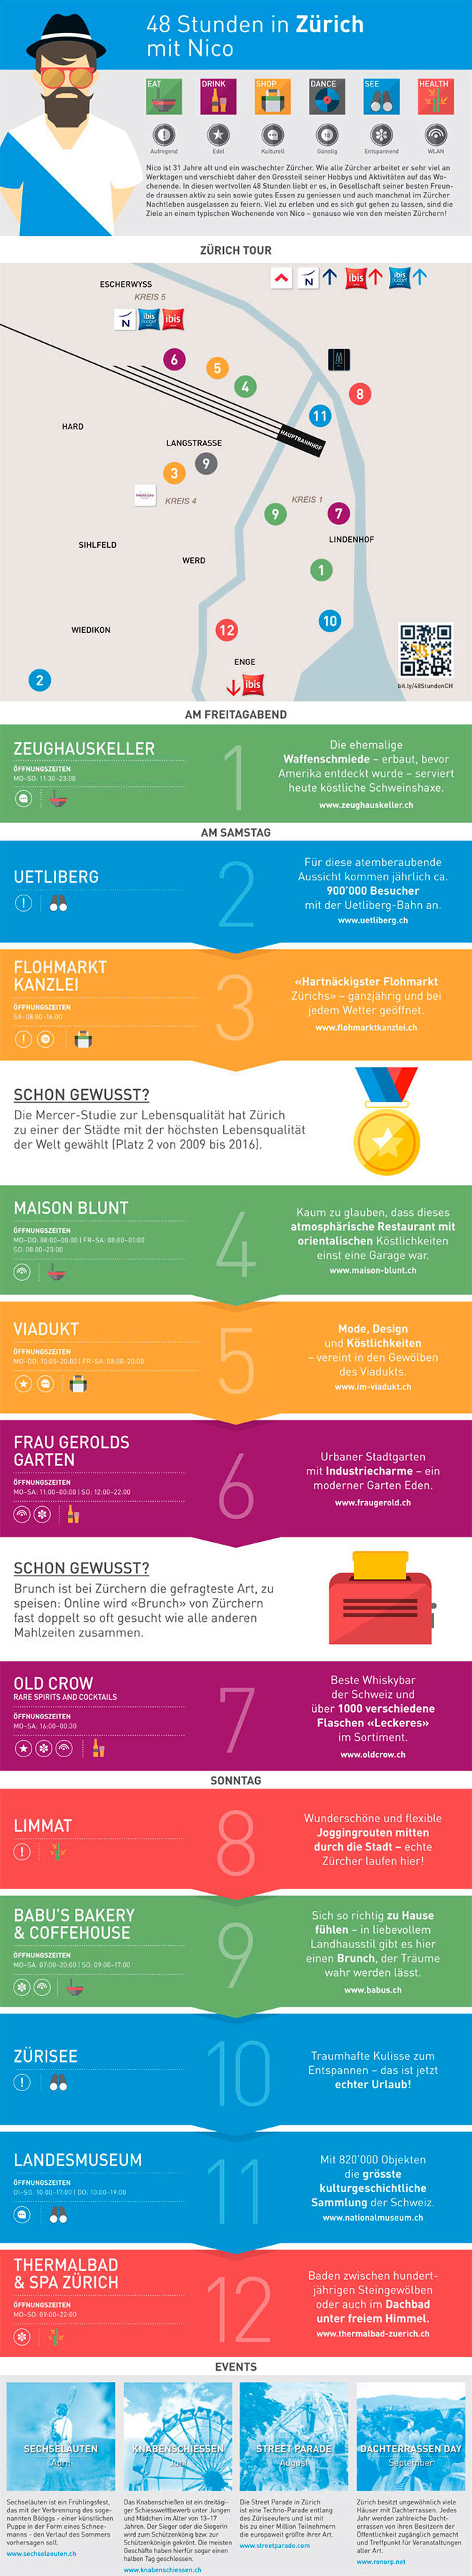 zurich infographics by all.accor.com